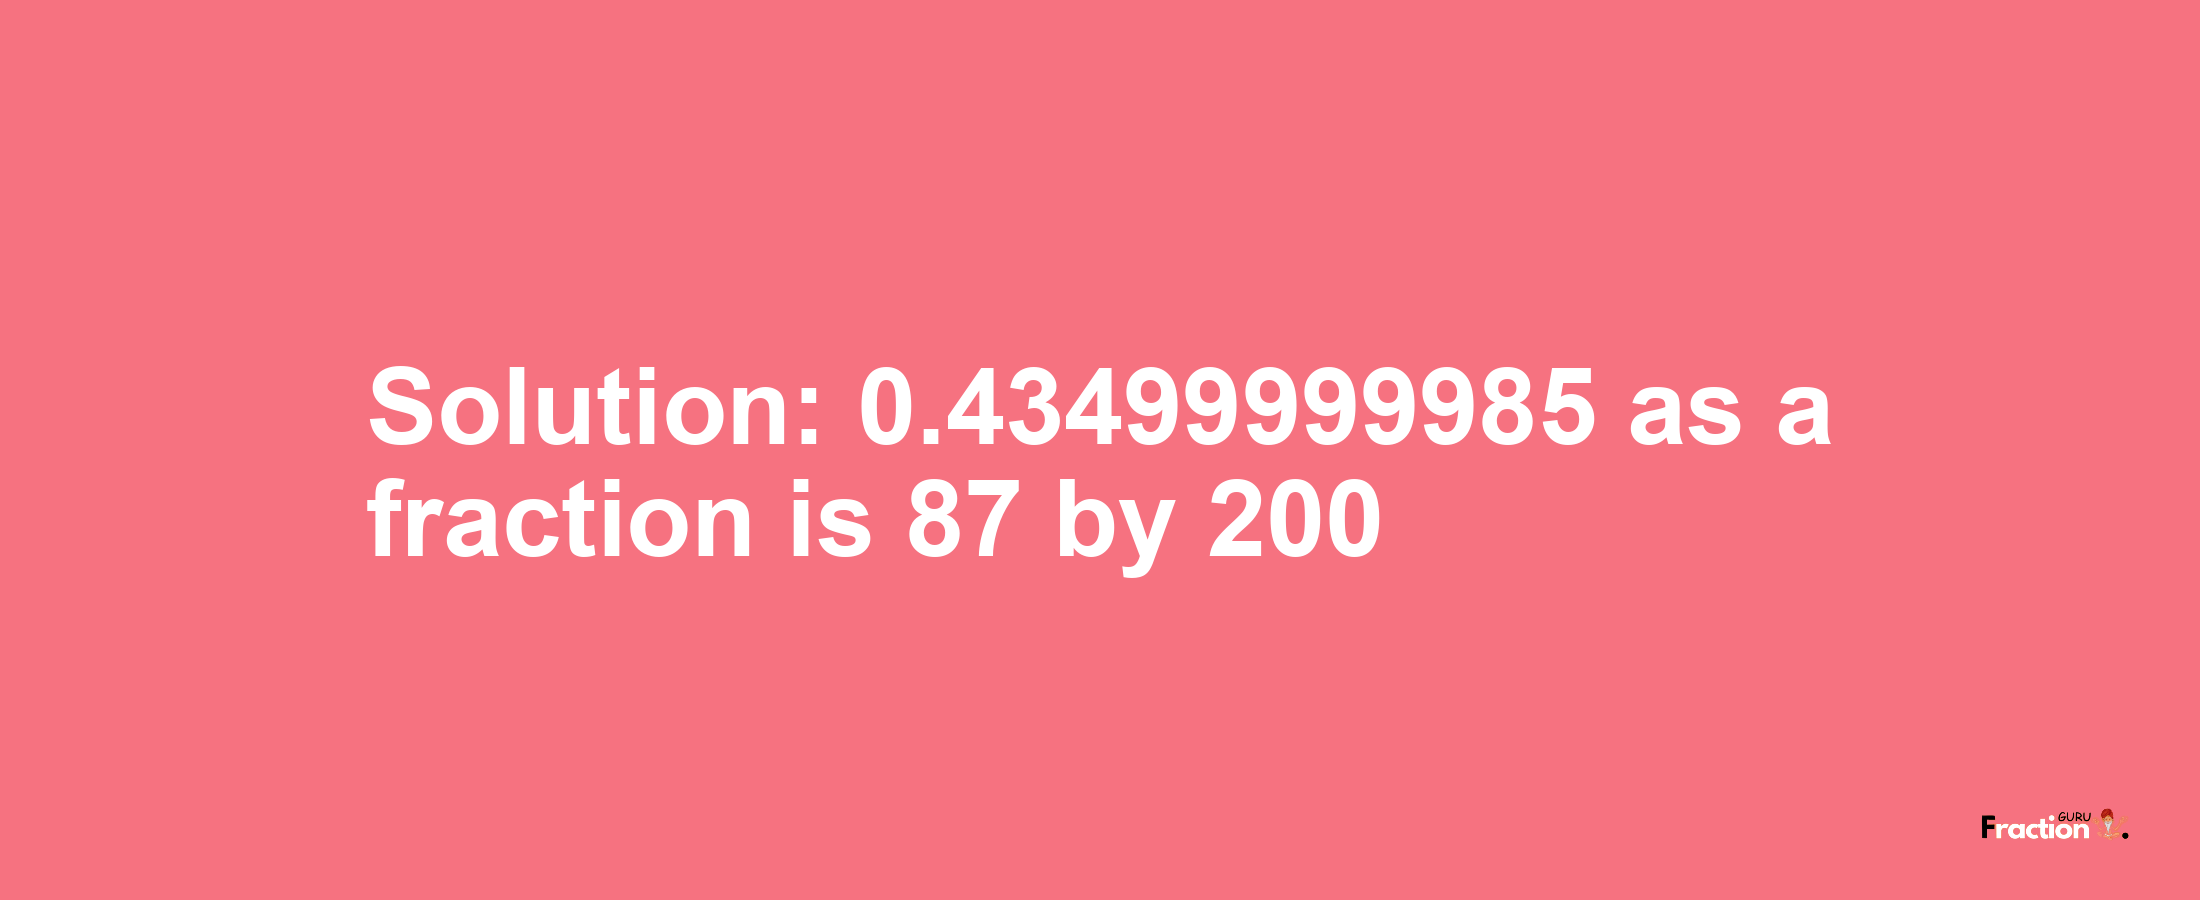 Solution:0.43499999985 as a fraction is 87/200